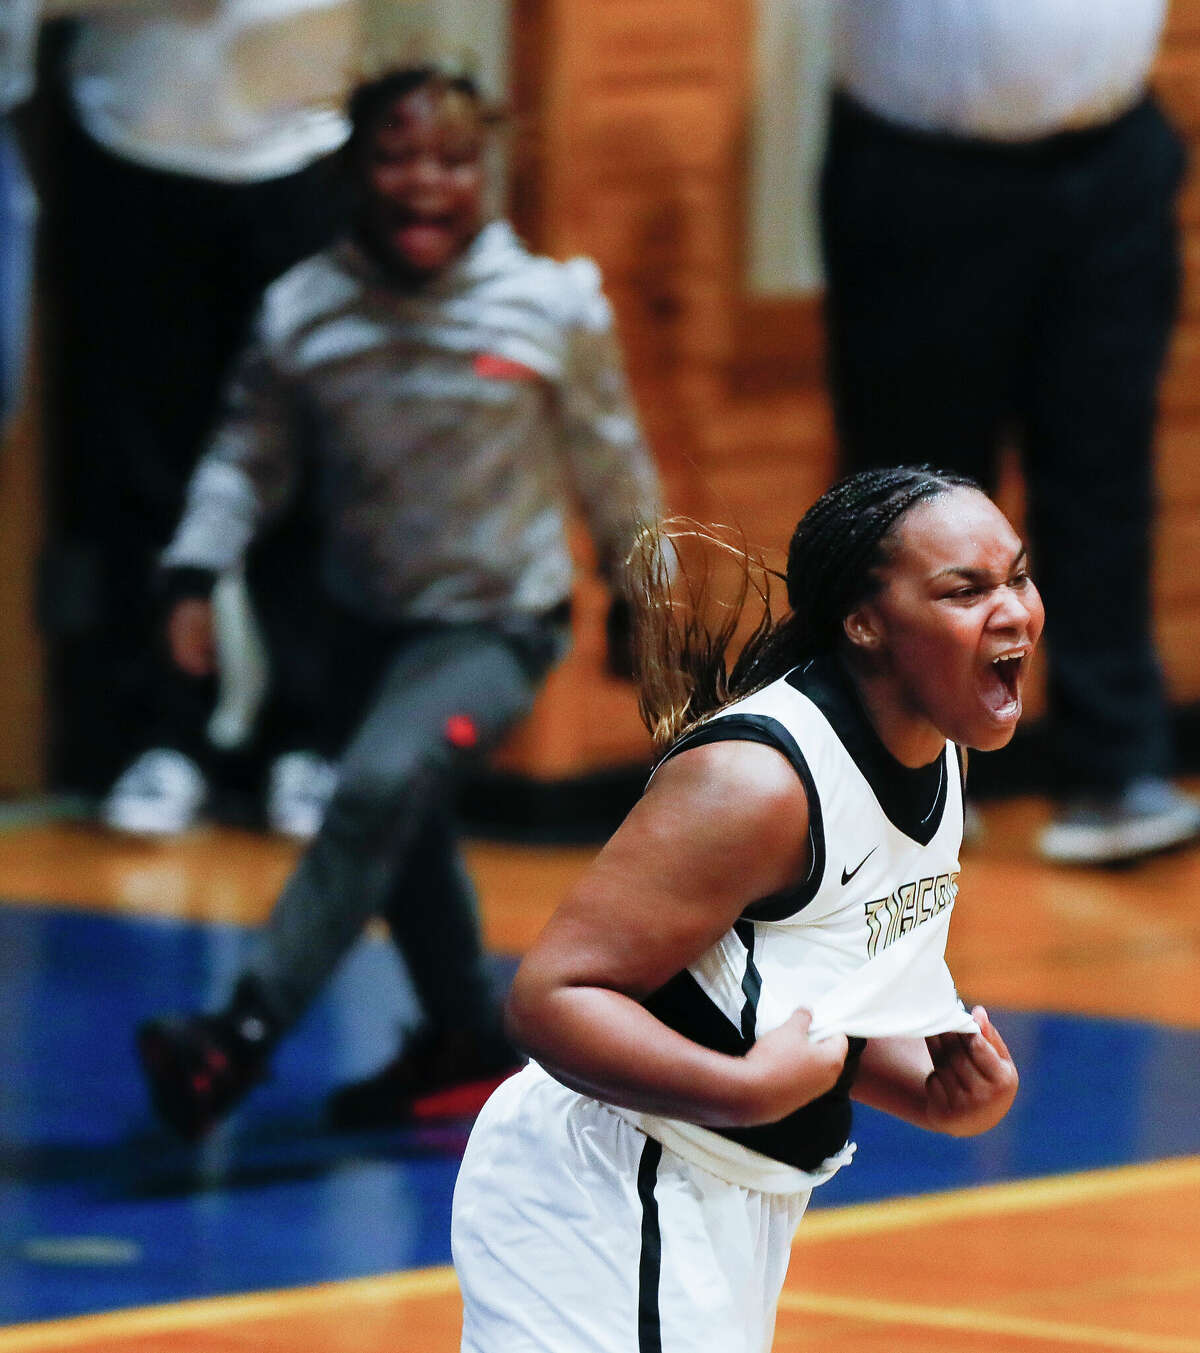 Conroe's Ra'Niyah Lewis (24) reacts after making a game-winning three-pointer to give the Lady Tigers a 40-38 win over Klein Collins during a Region II-6A quarterfinal high school basketball playoff game at Dekaney High School, Tuesday, Feb. 22, 2022, in Spring.